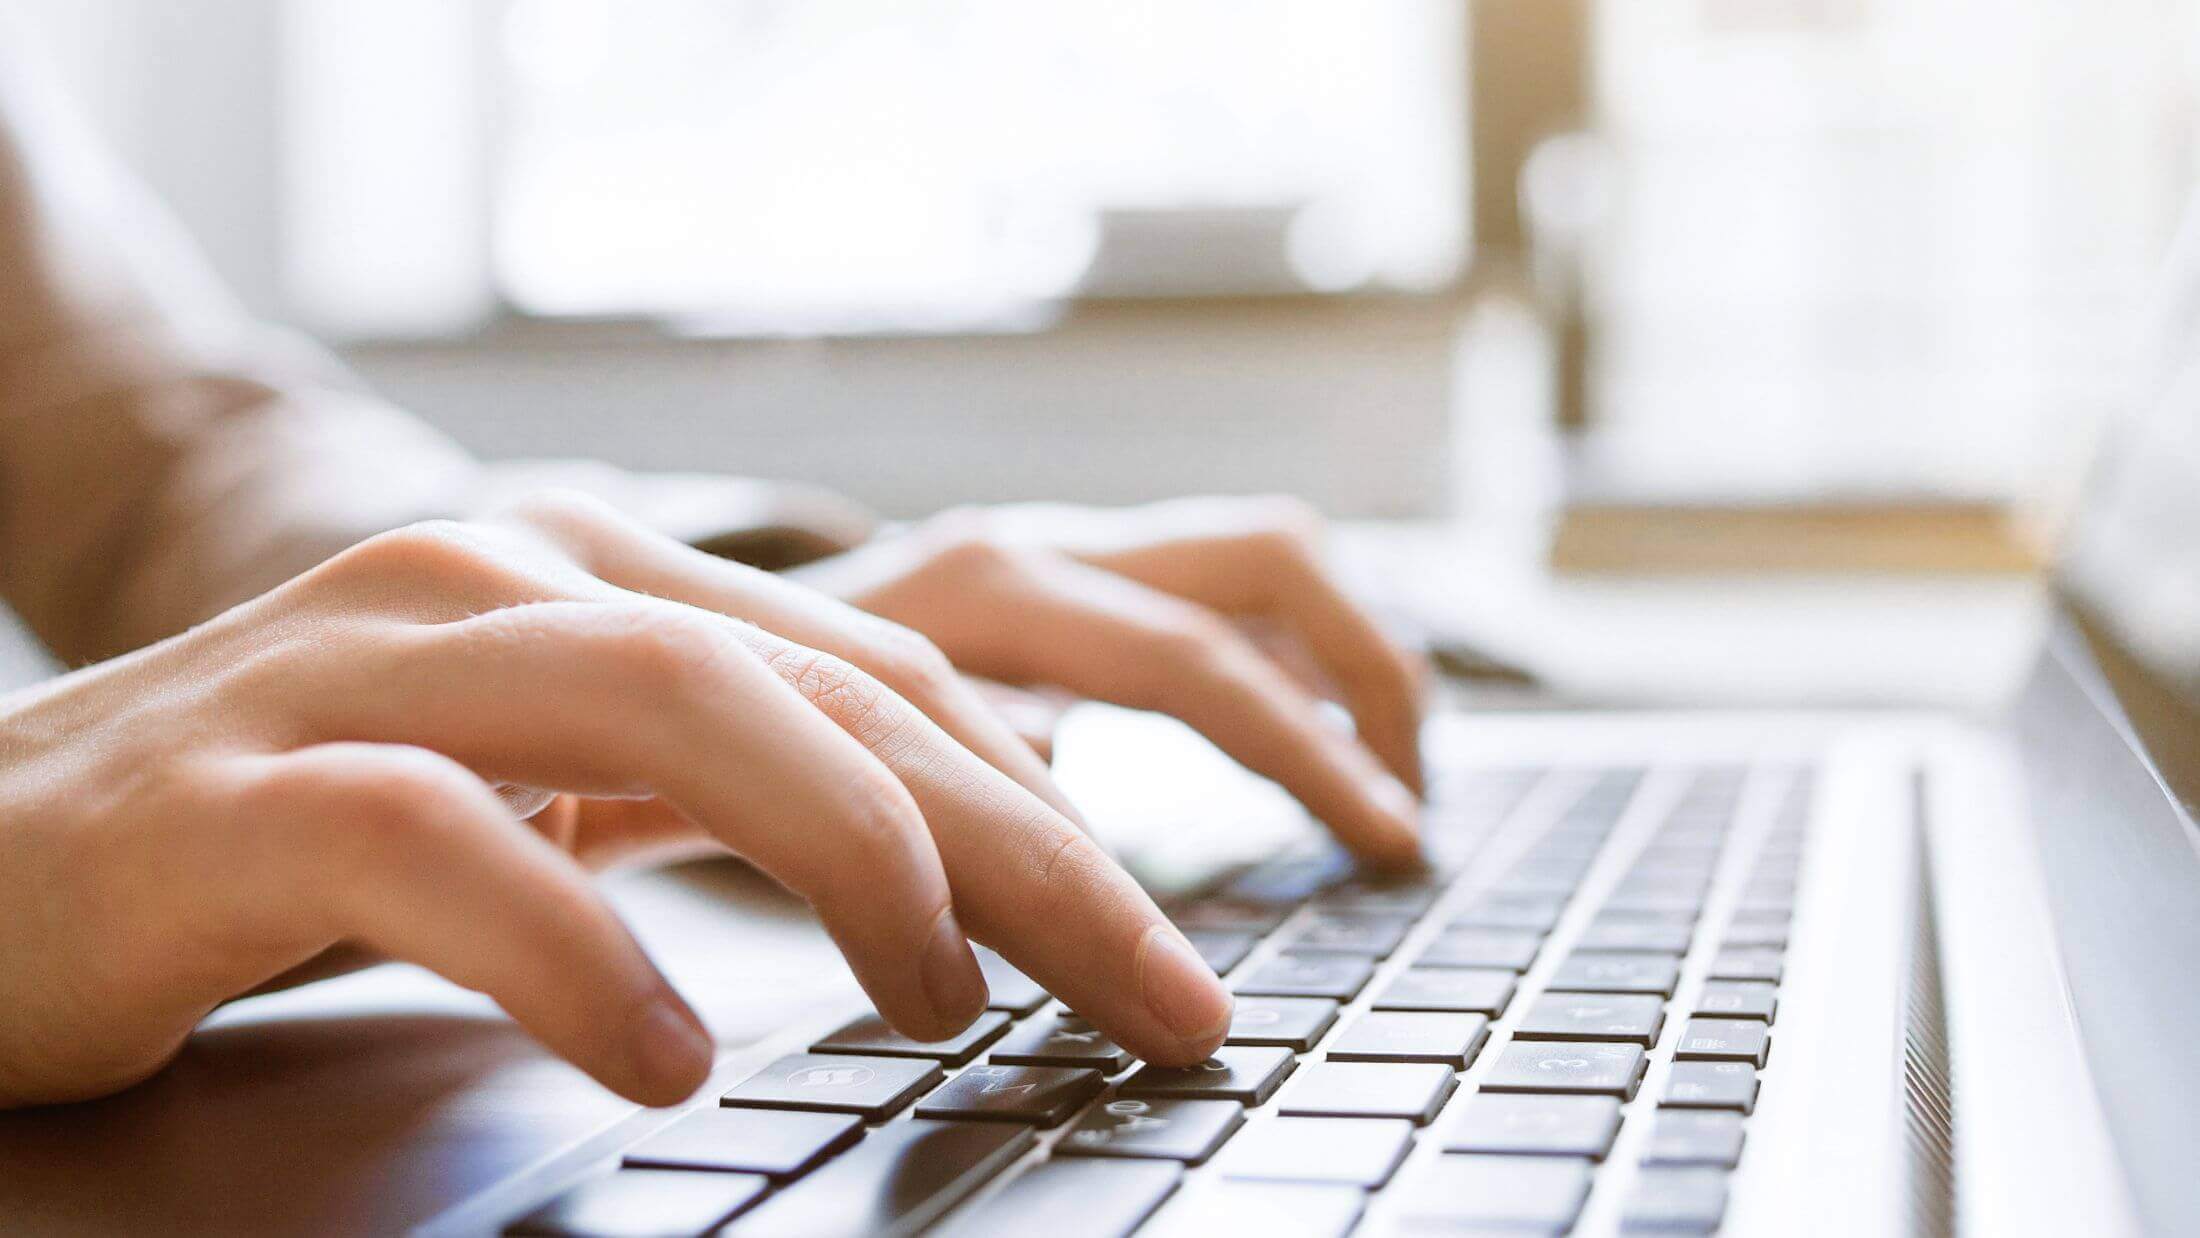 Close-up of a person's hands typing on a laptop keyboard, with a blurred background suggesting a bright and airy room.